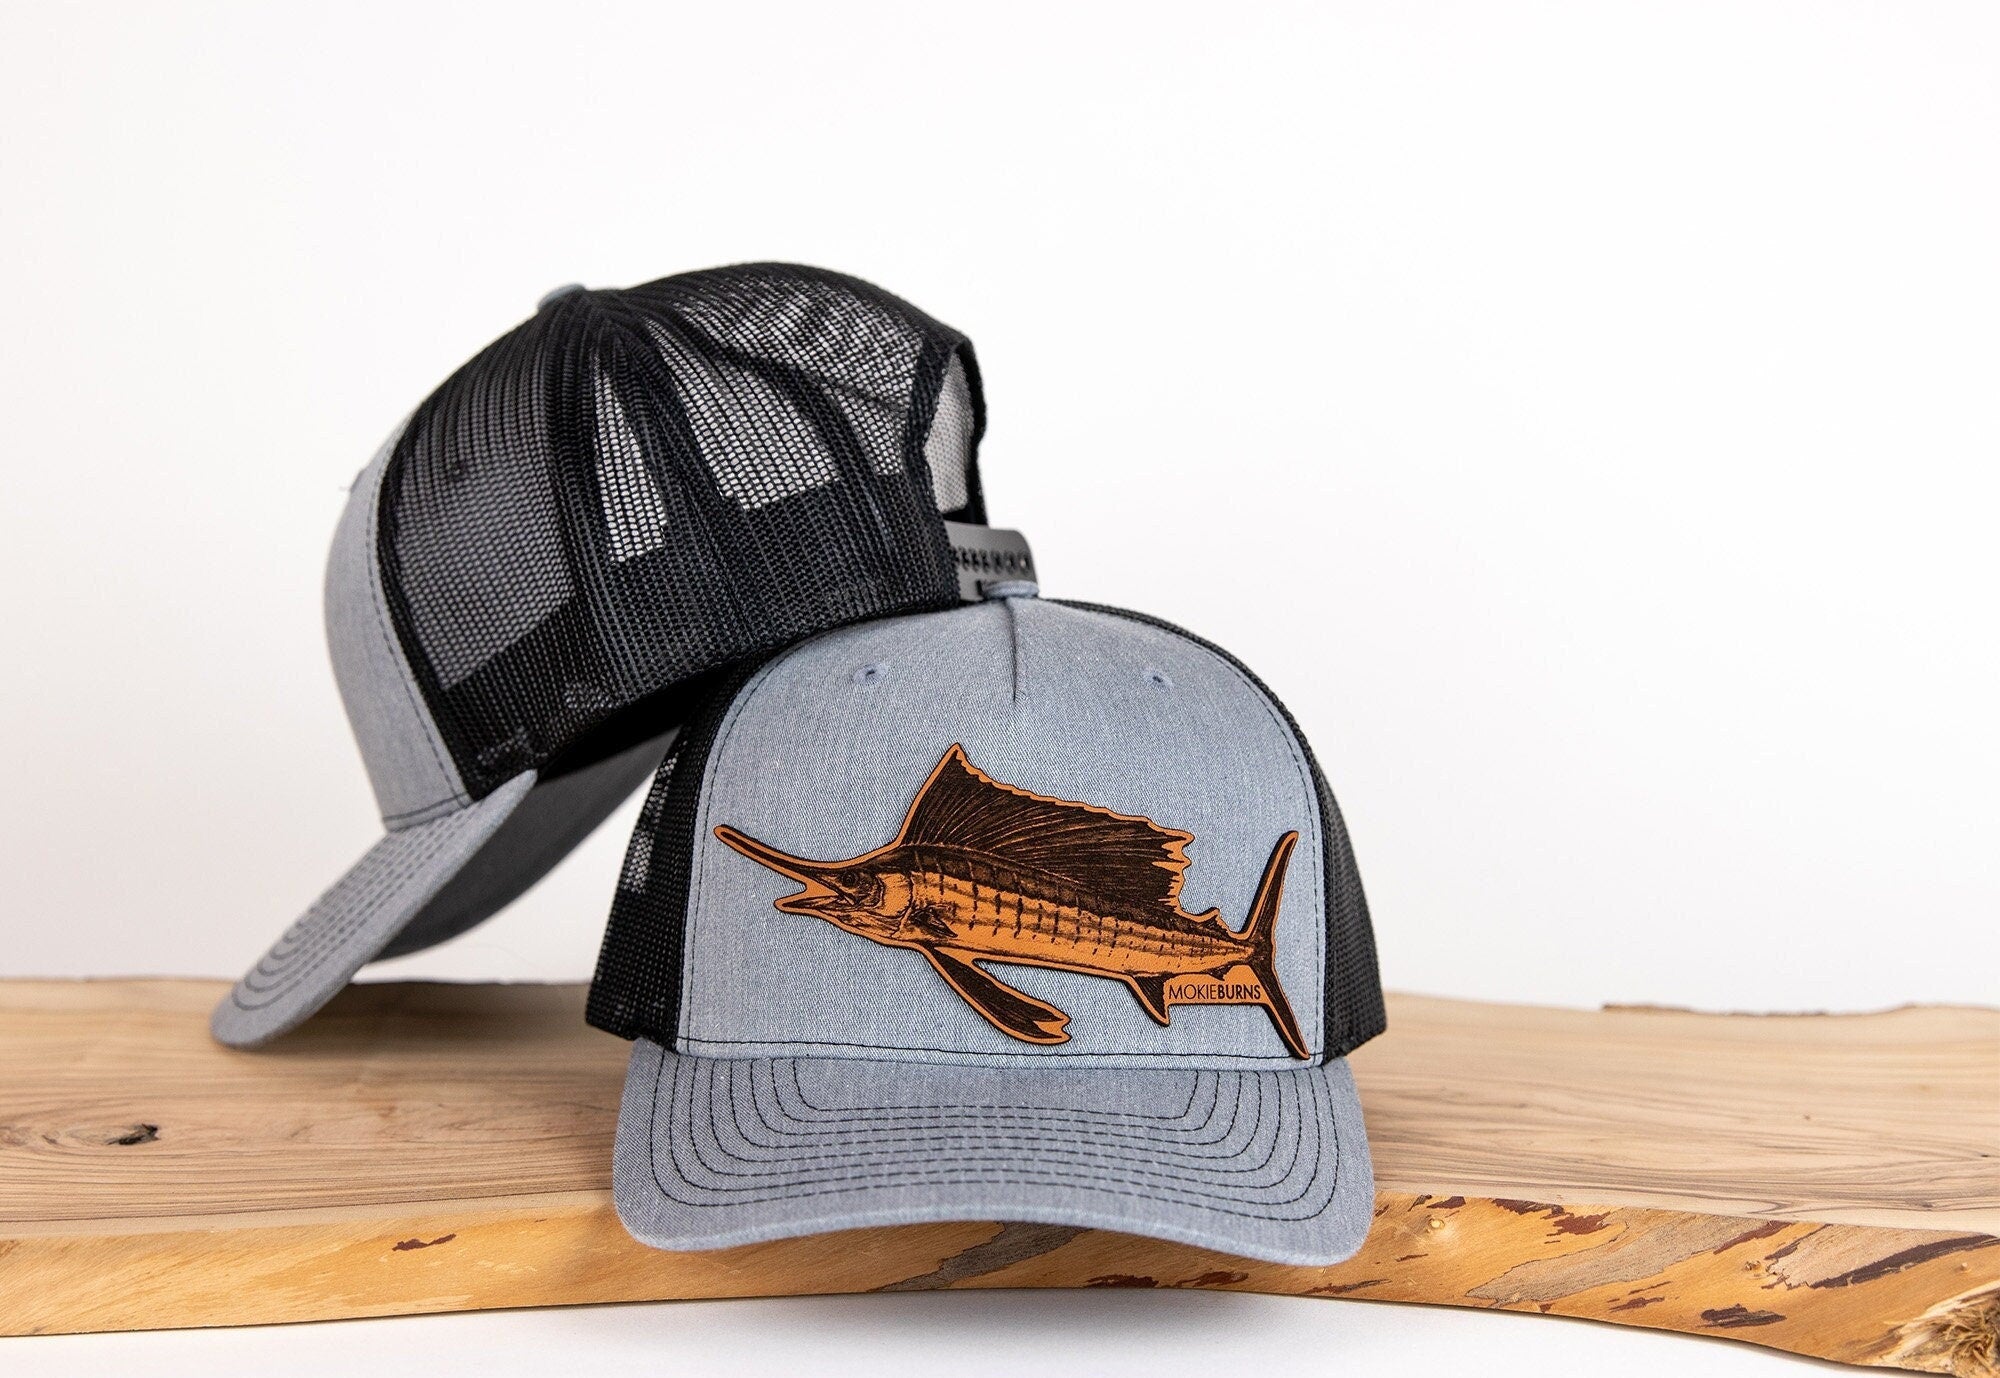 Fishing Trucker Hat - Sailfish Leather Patch, offshore fishing